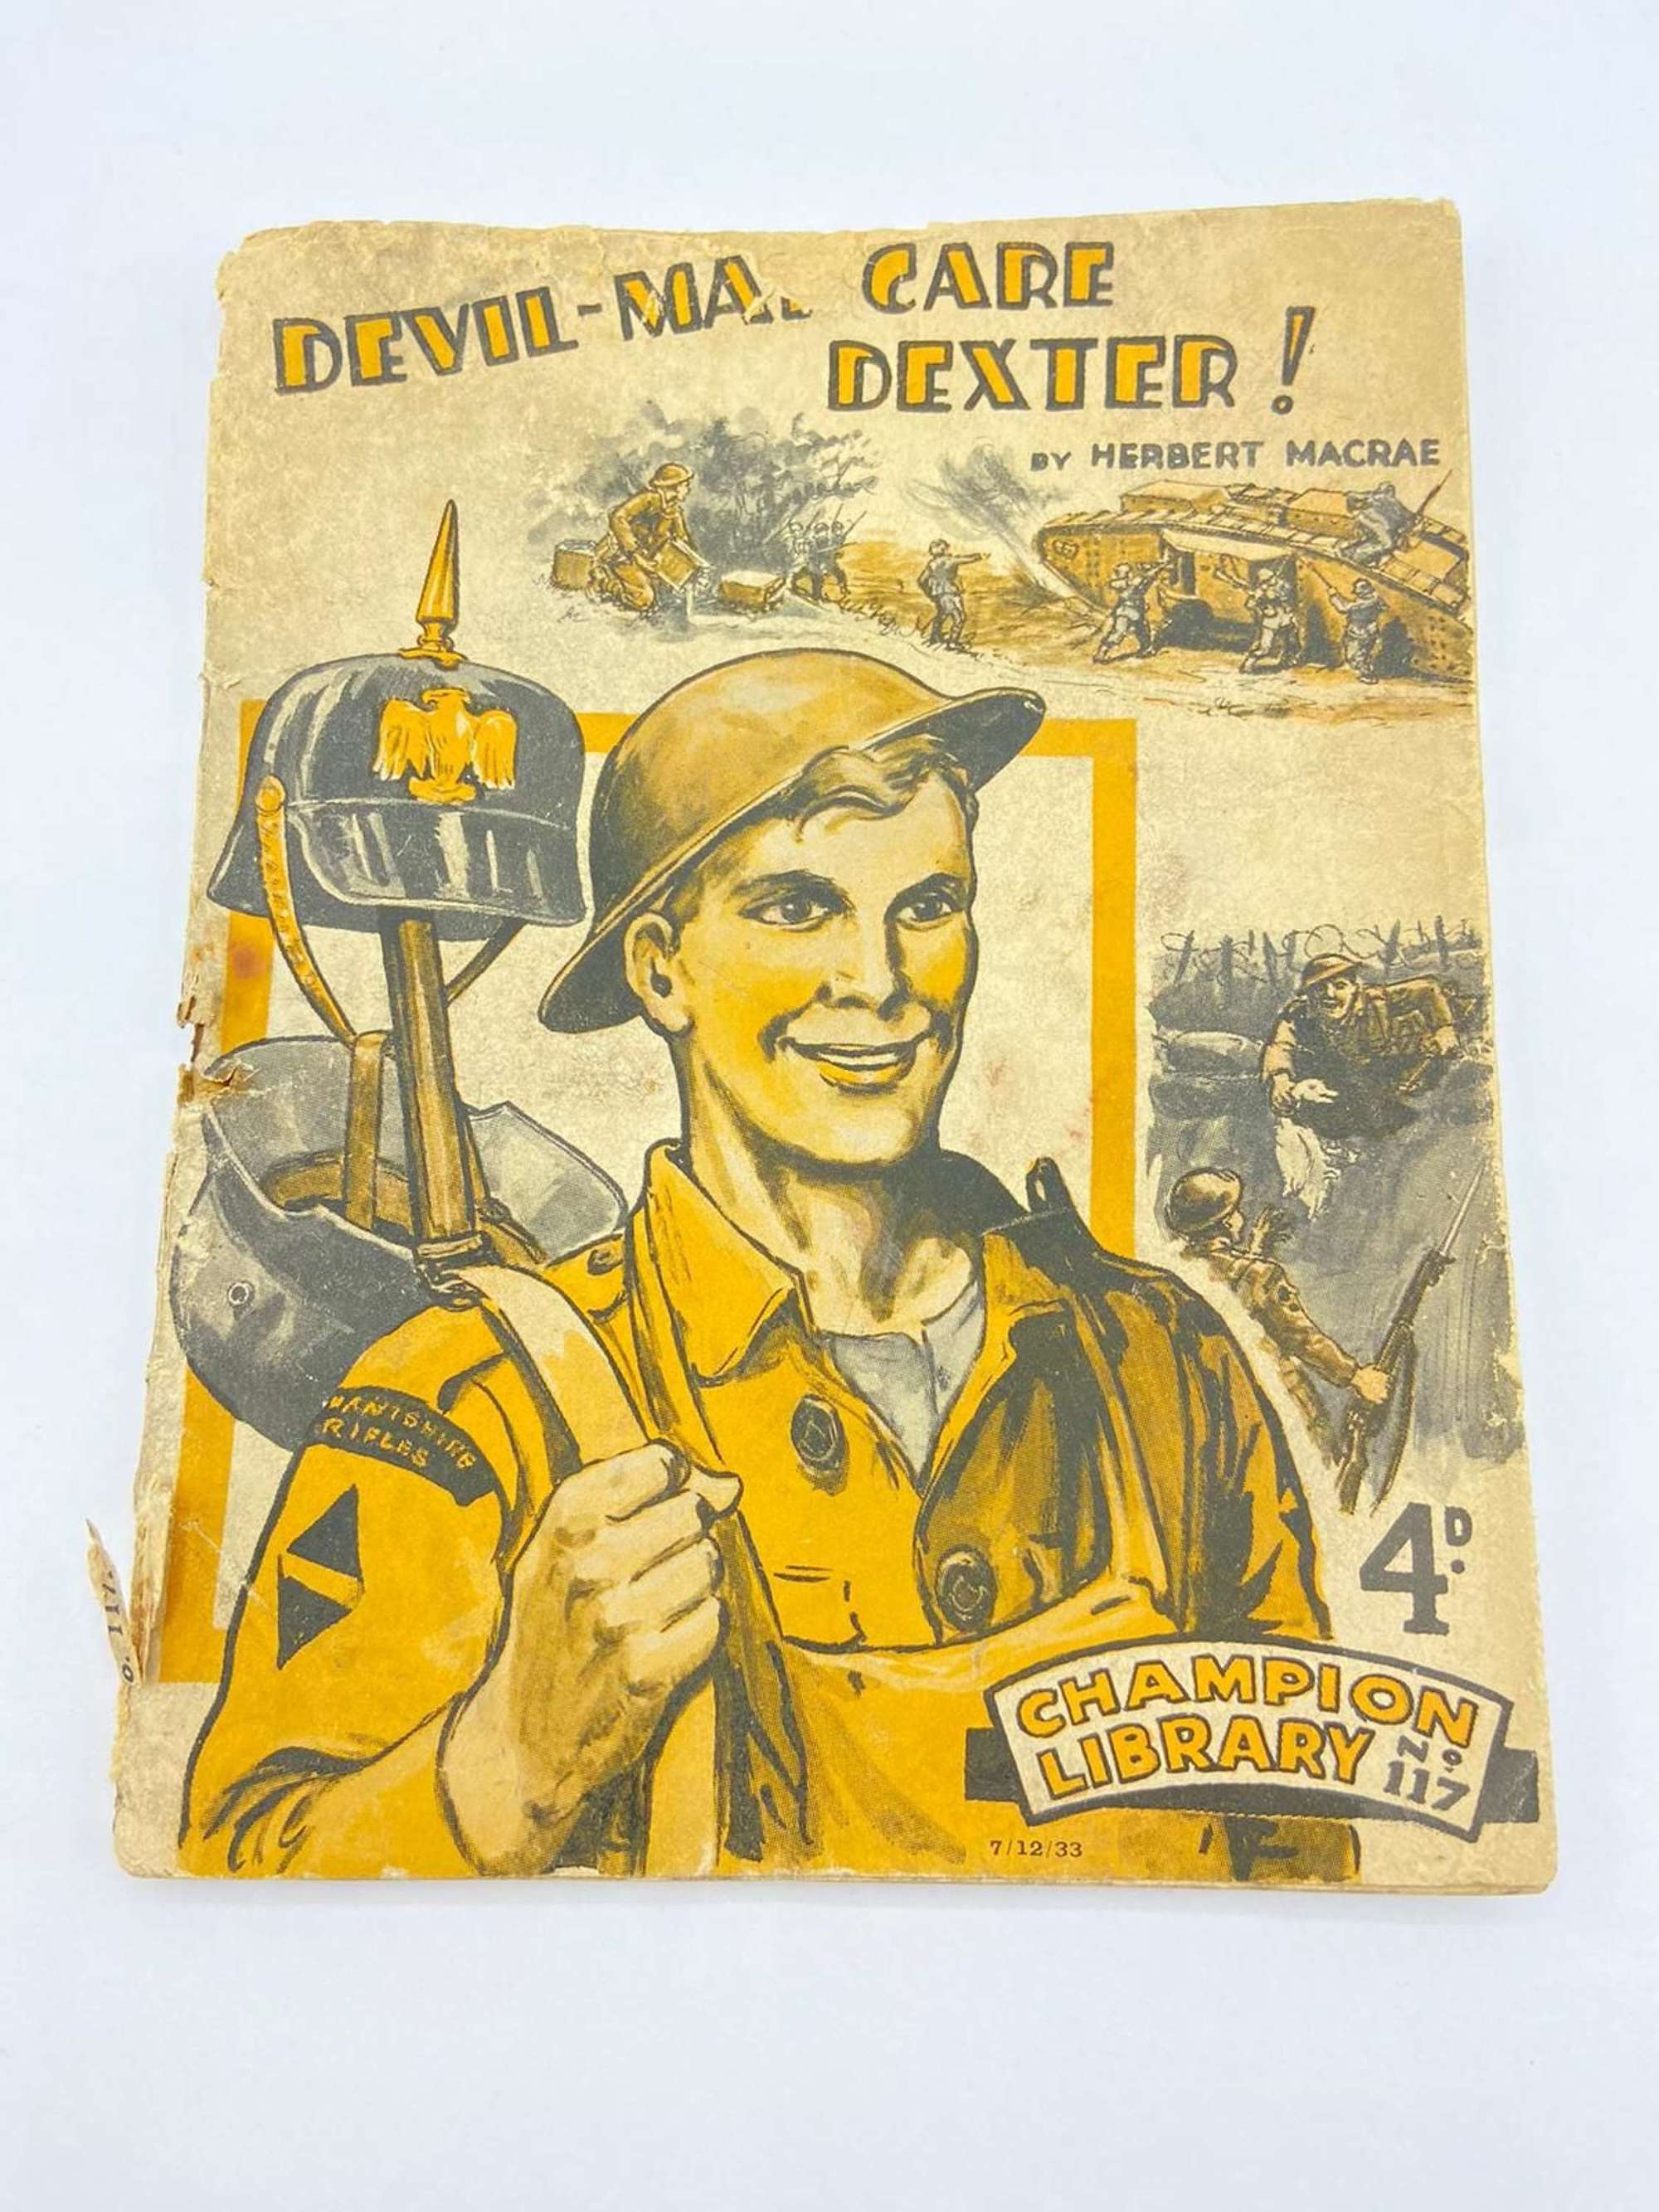 1933 Devil-May-Care Dexter No117 Champion Library By Herbert Macrae